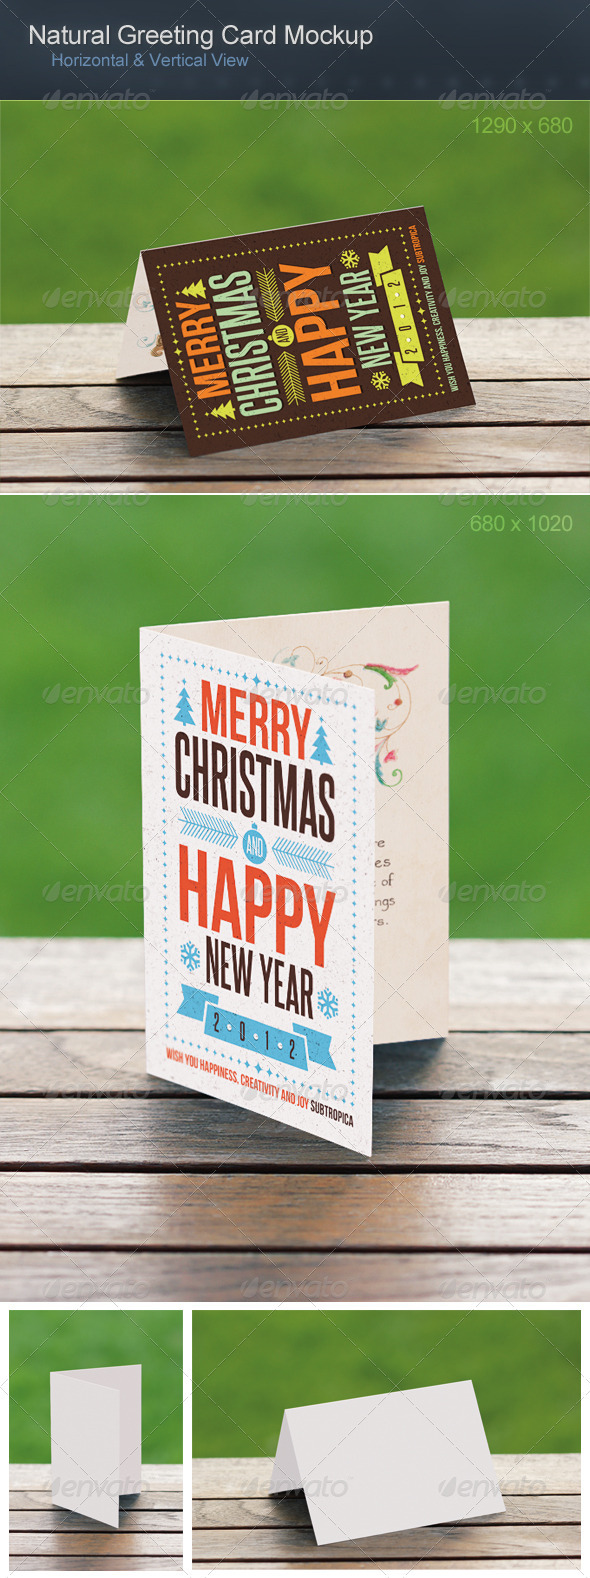 Natural Greeting Card Mockup by h3design GraphicRiver